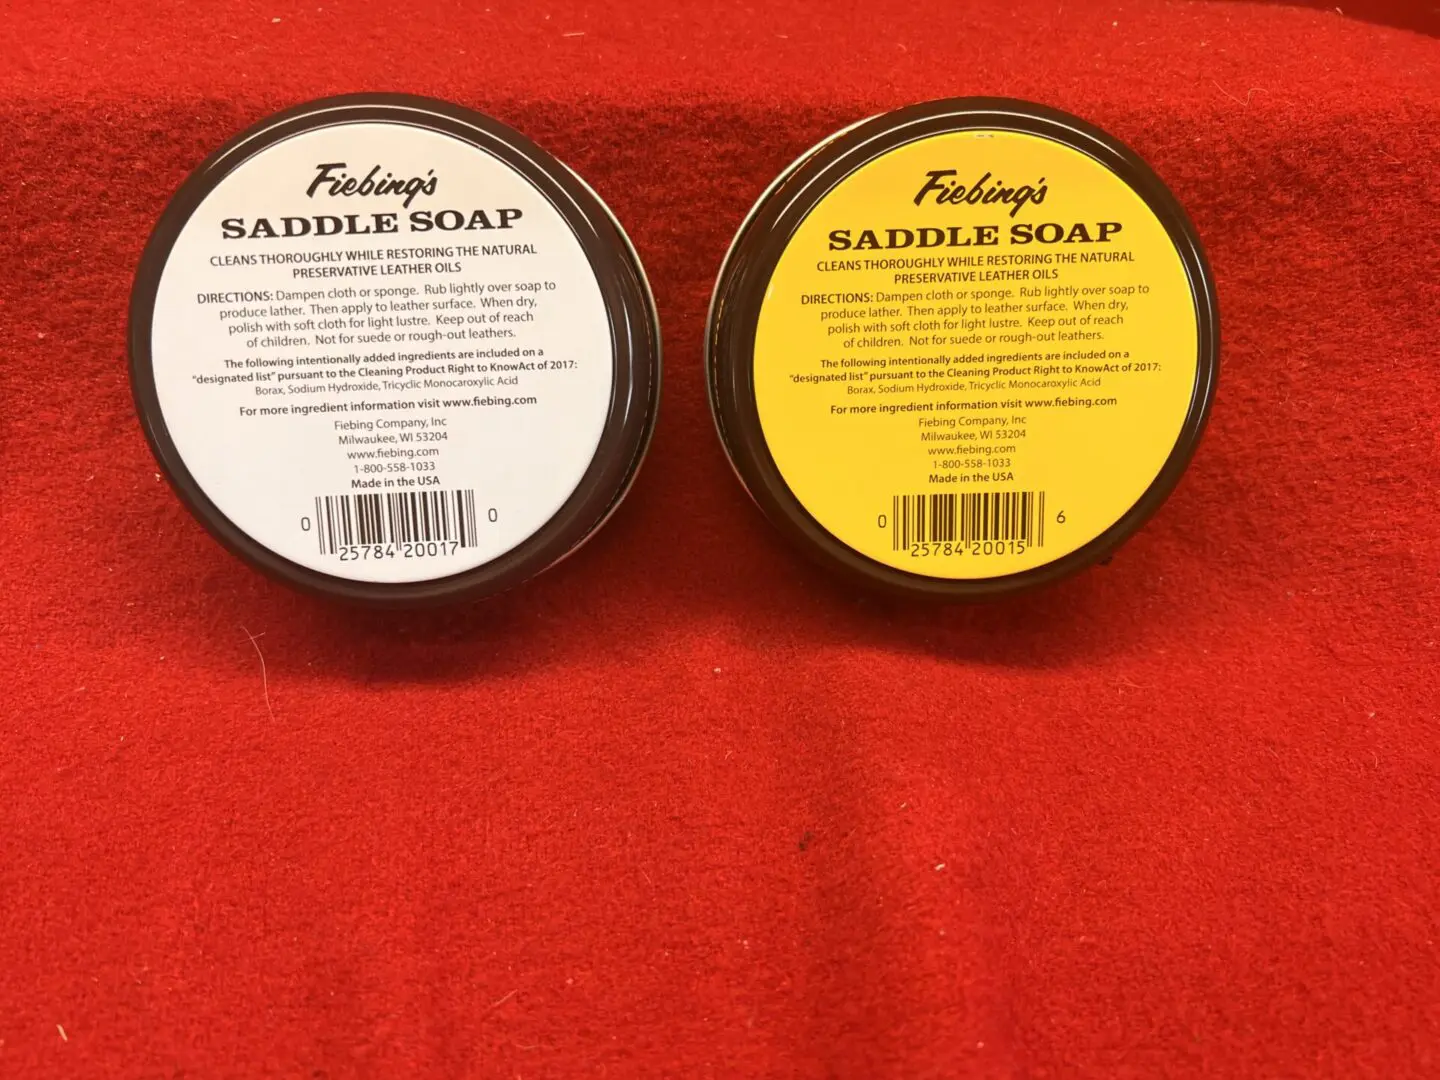 Fiebing's Saddle Soap White 12 oz Polish and Clean Leather Revives